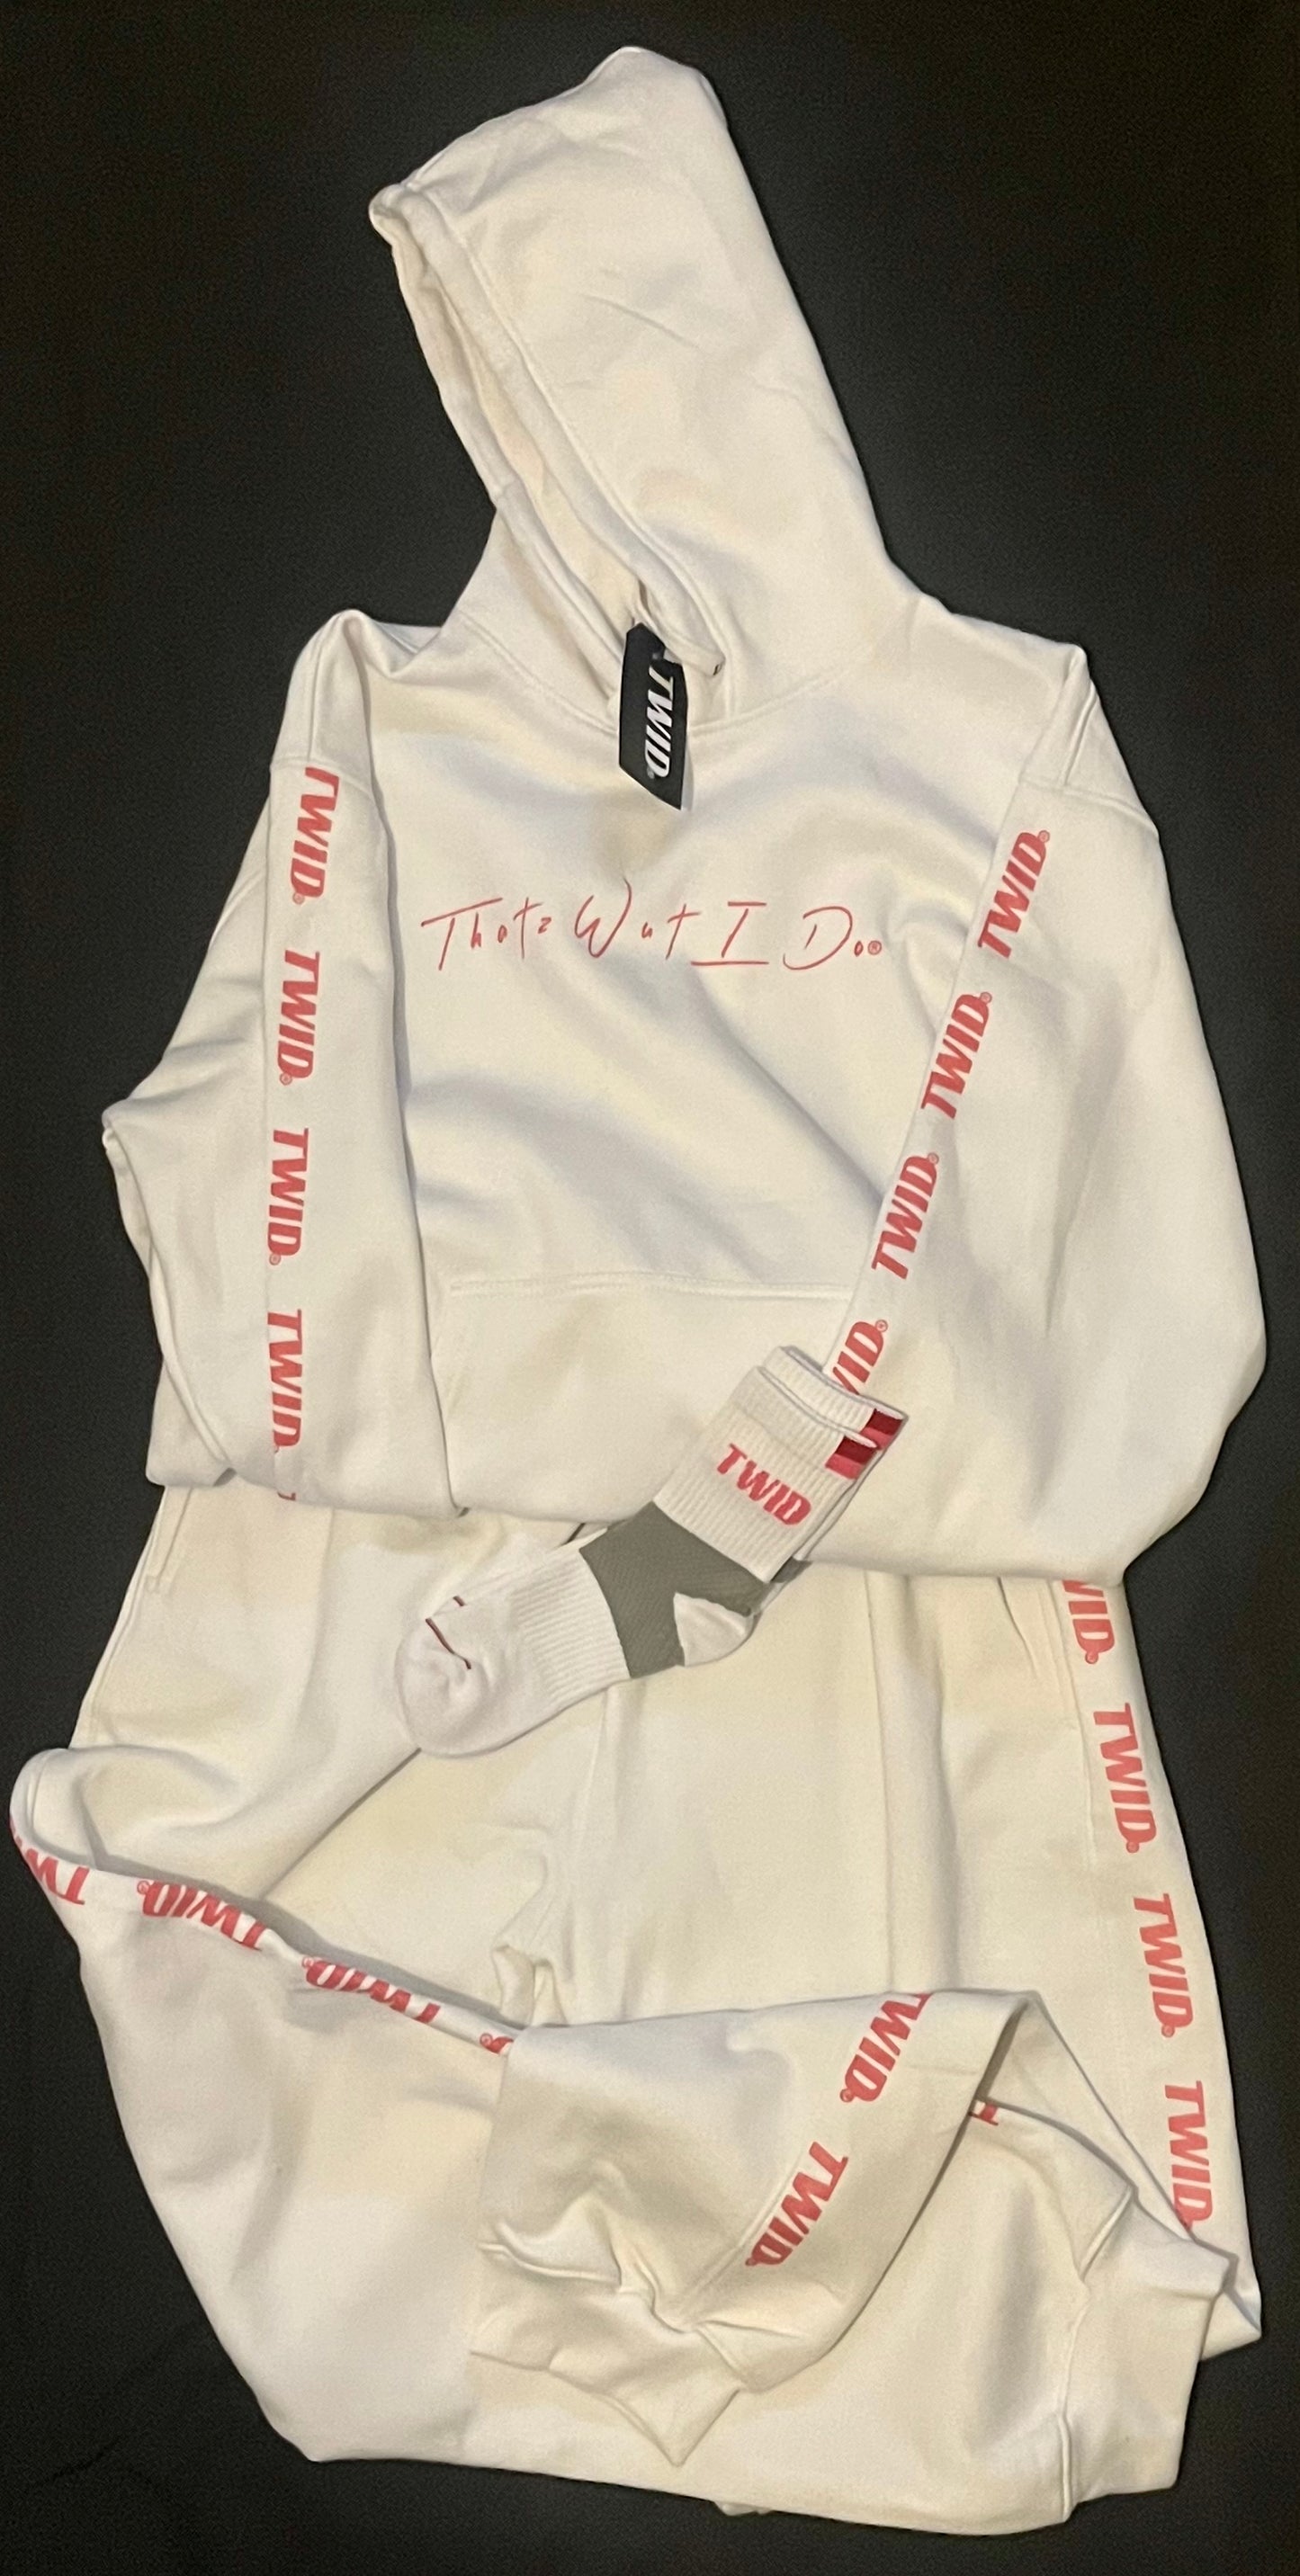 TwidWear All-In-One Unisex Sweatsuit (with matching workout socks)